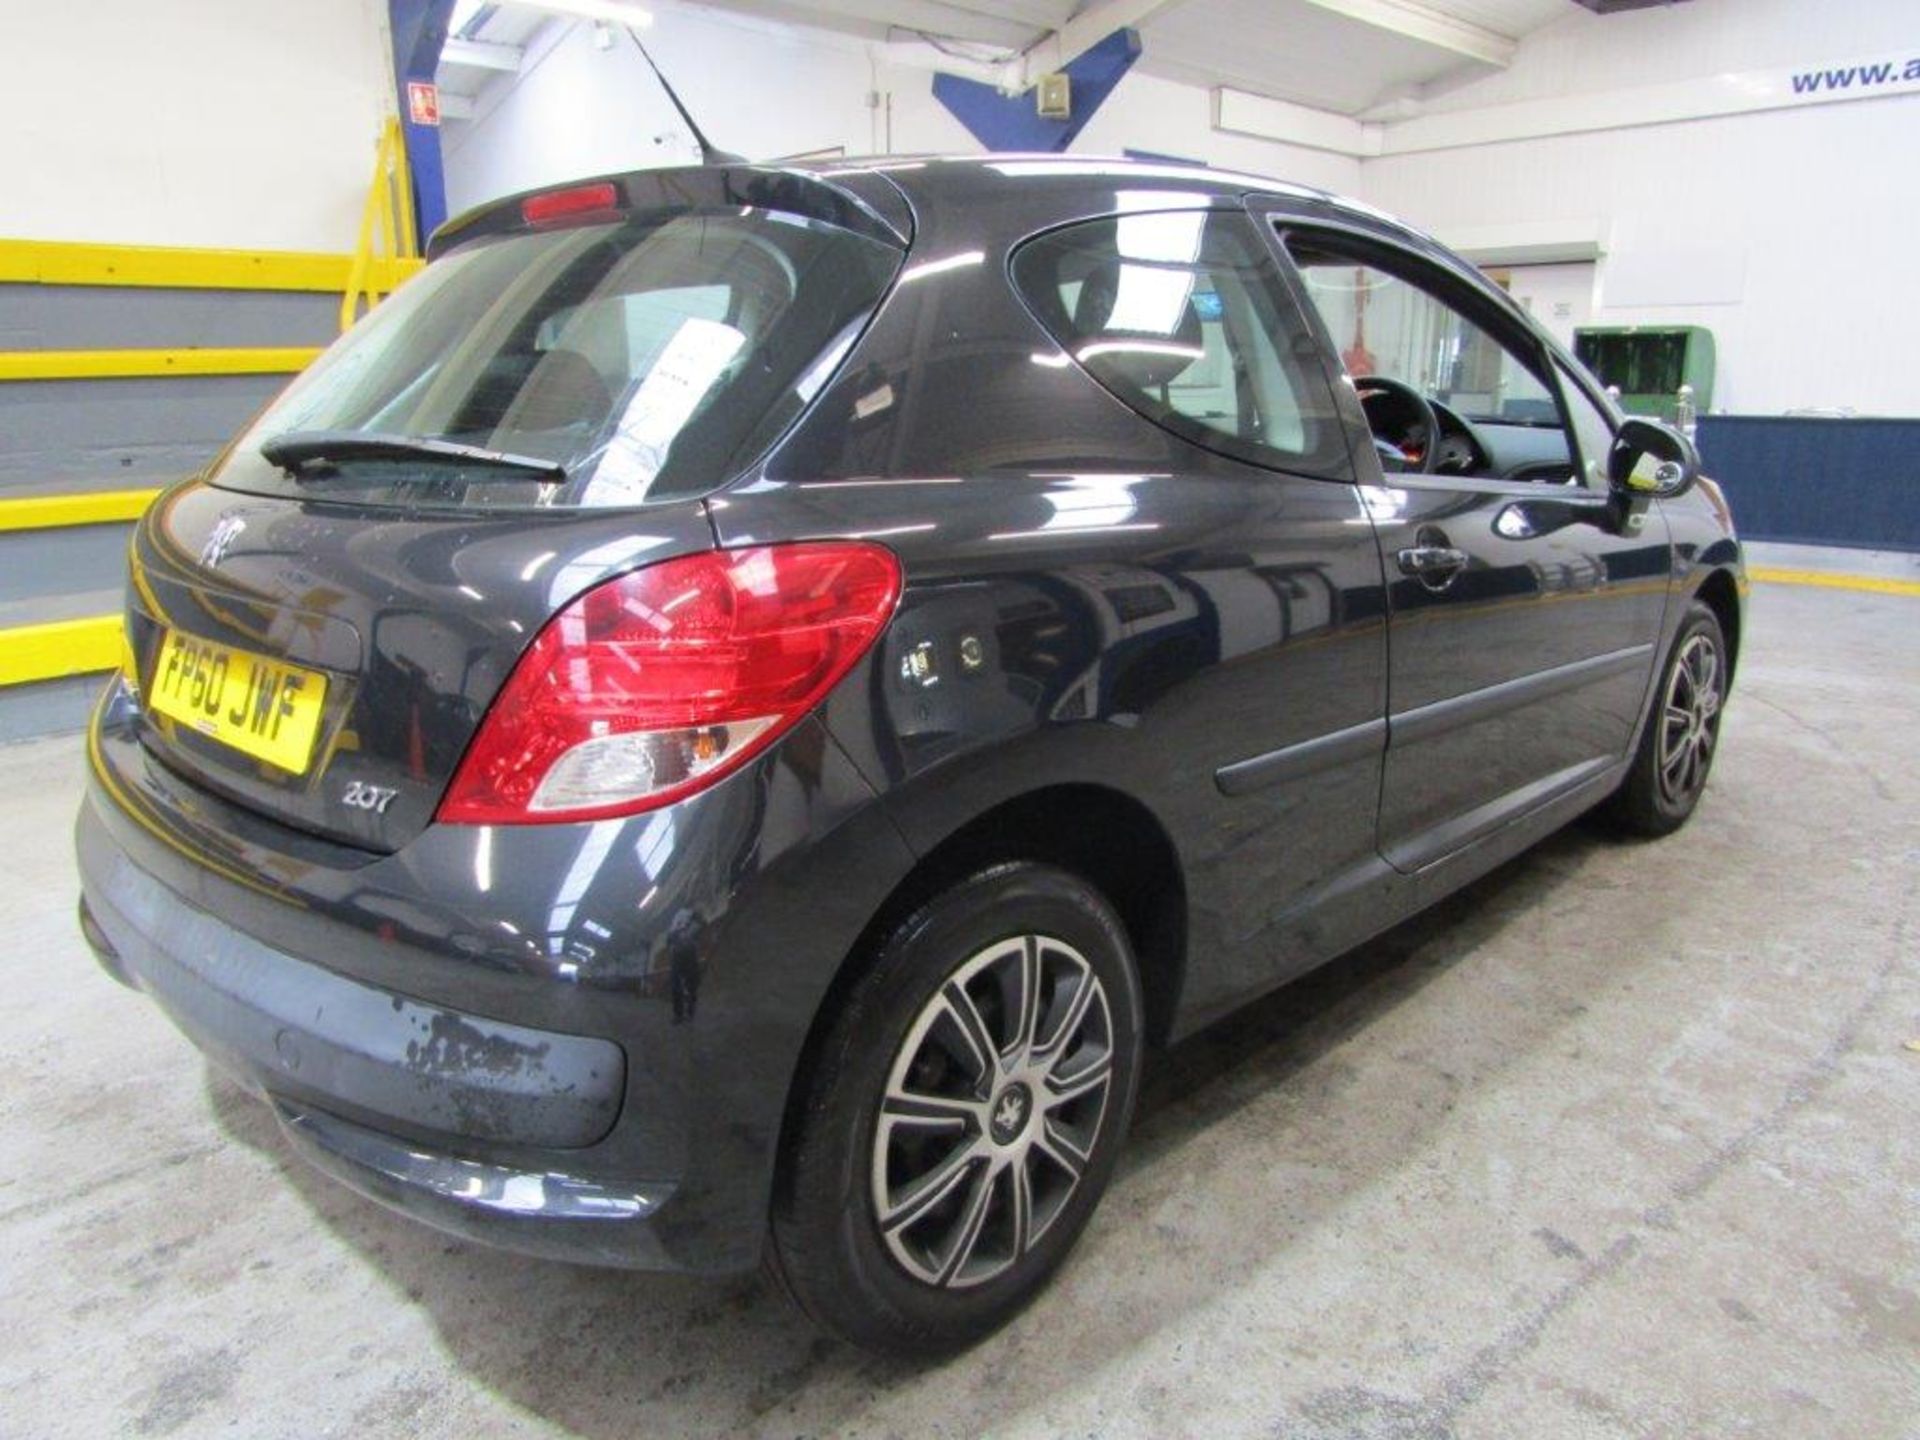 60 10 Peugeot 207 S HDi - Image 14 of 18